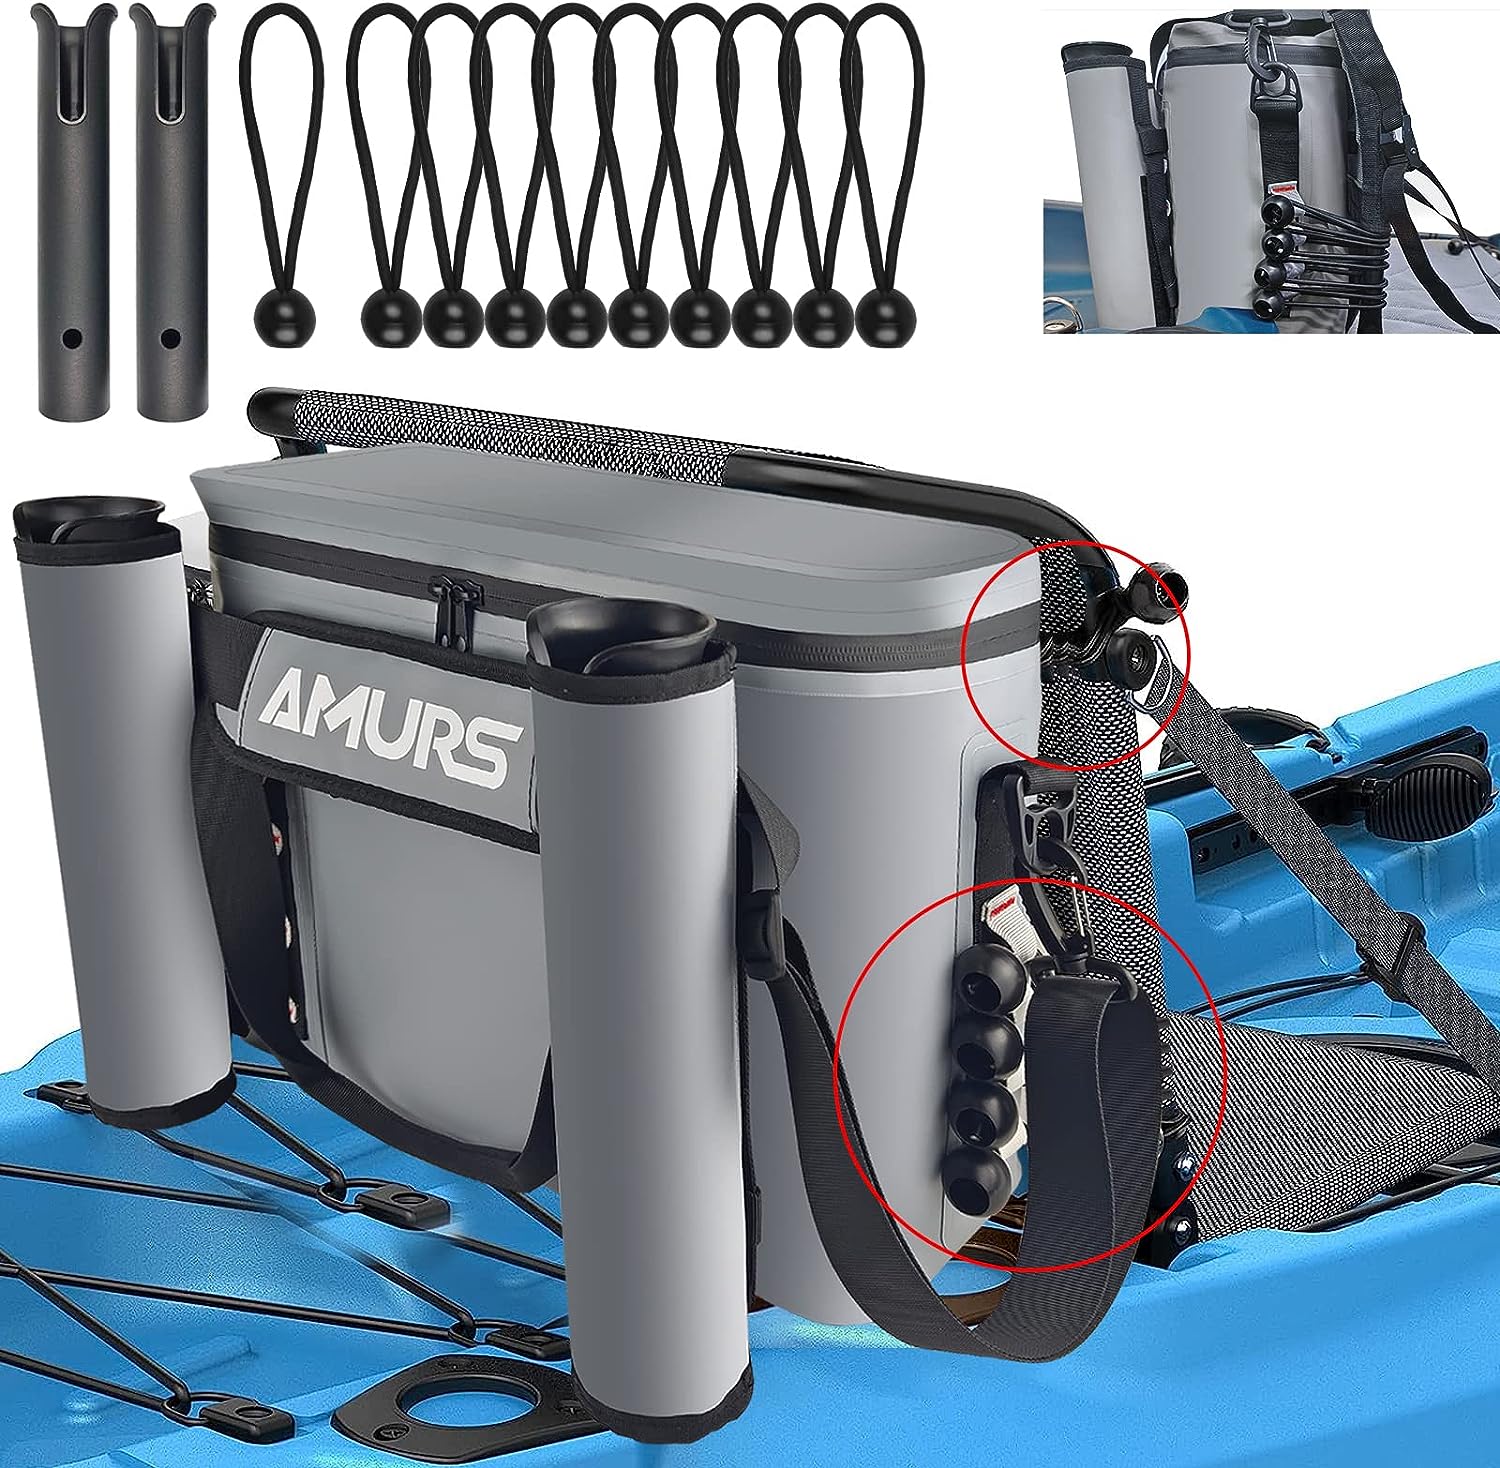 AMURS Kayak Cooler Behind Seat,Waterproof Kayak Cooler,Portable Kayak Accessories Kayak Cooler Bag with Fishing Rod Holder Cooler for Kayaks with Lawn-Chair Style Seat,Fishing,Lunch,Beach,Camping